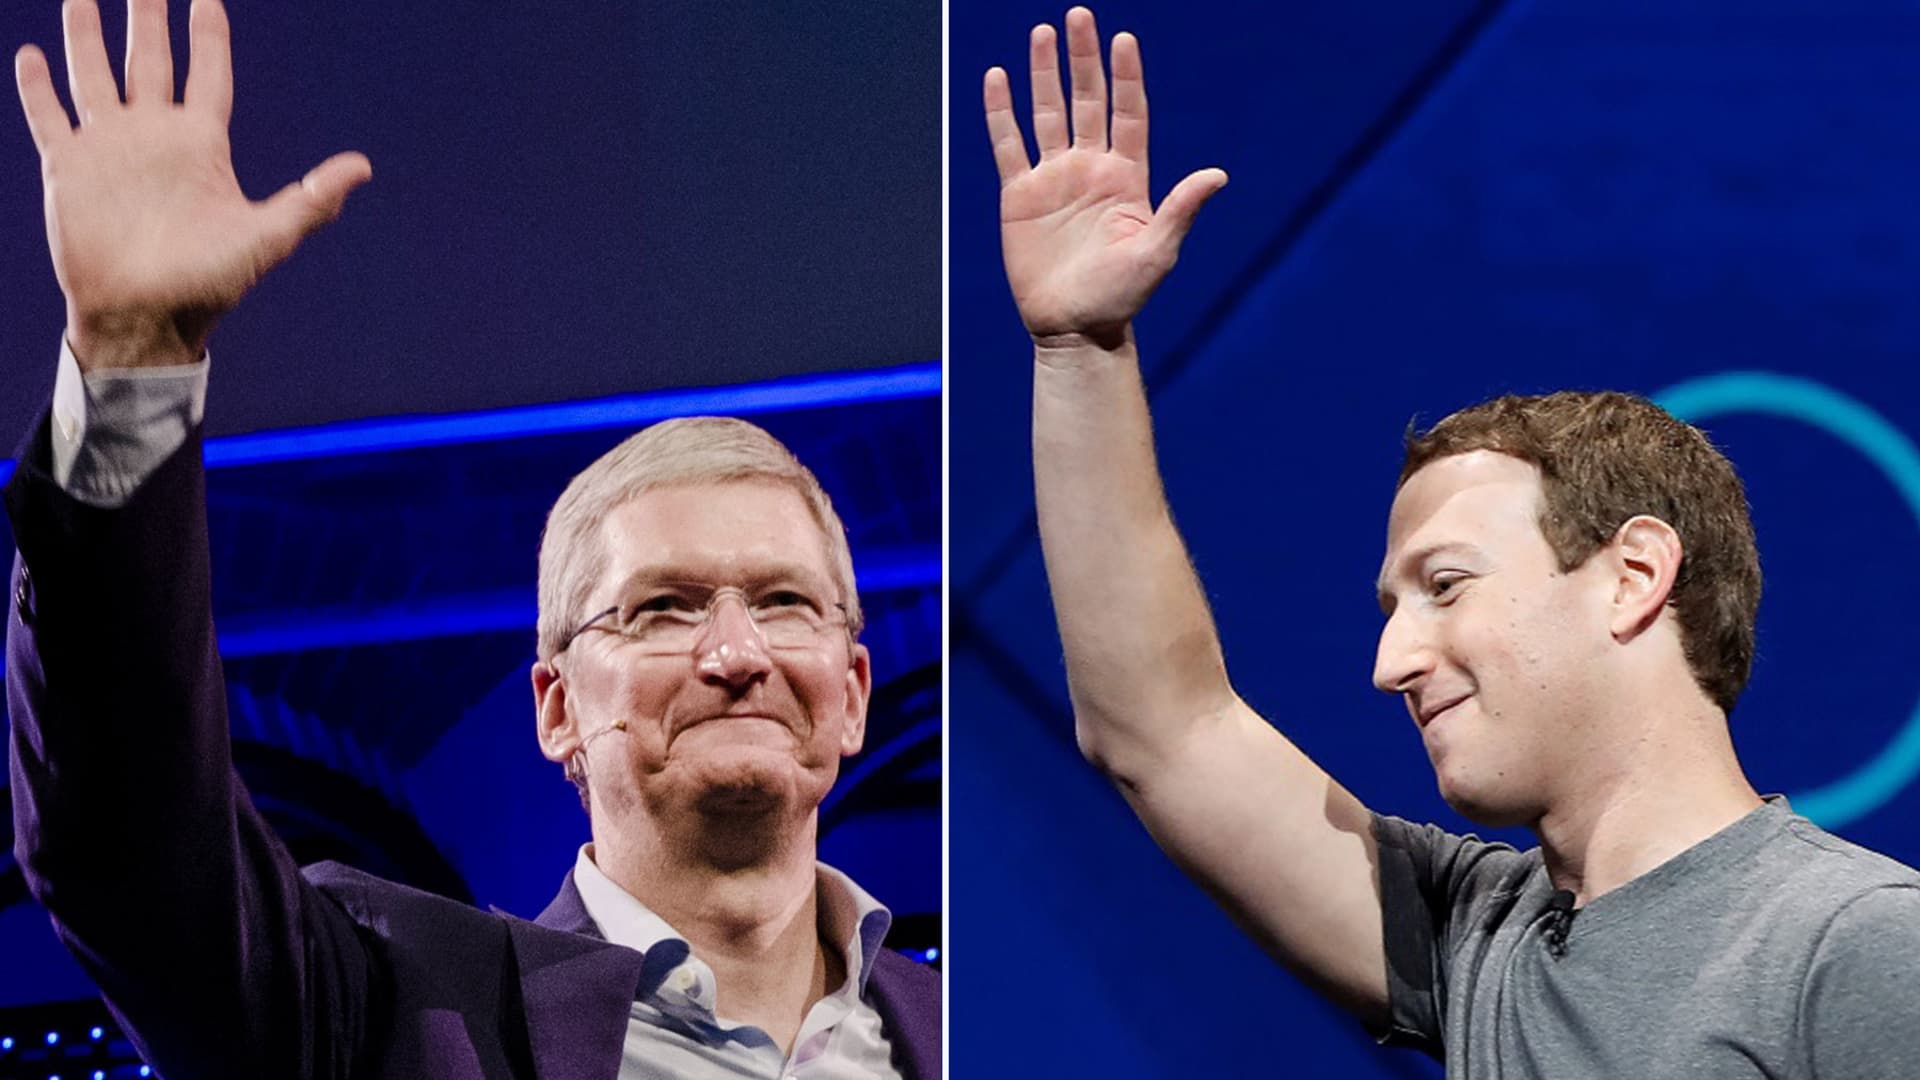 These new screens in Apple's App Store help explain why Facebook and Apple are at odds